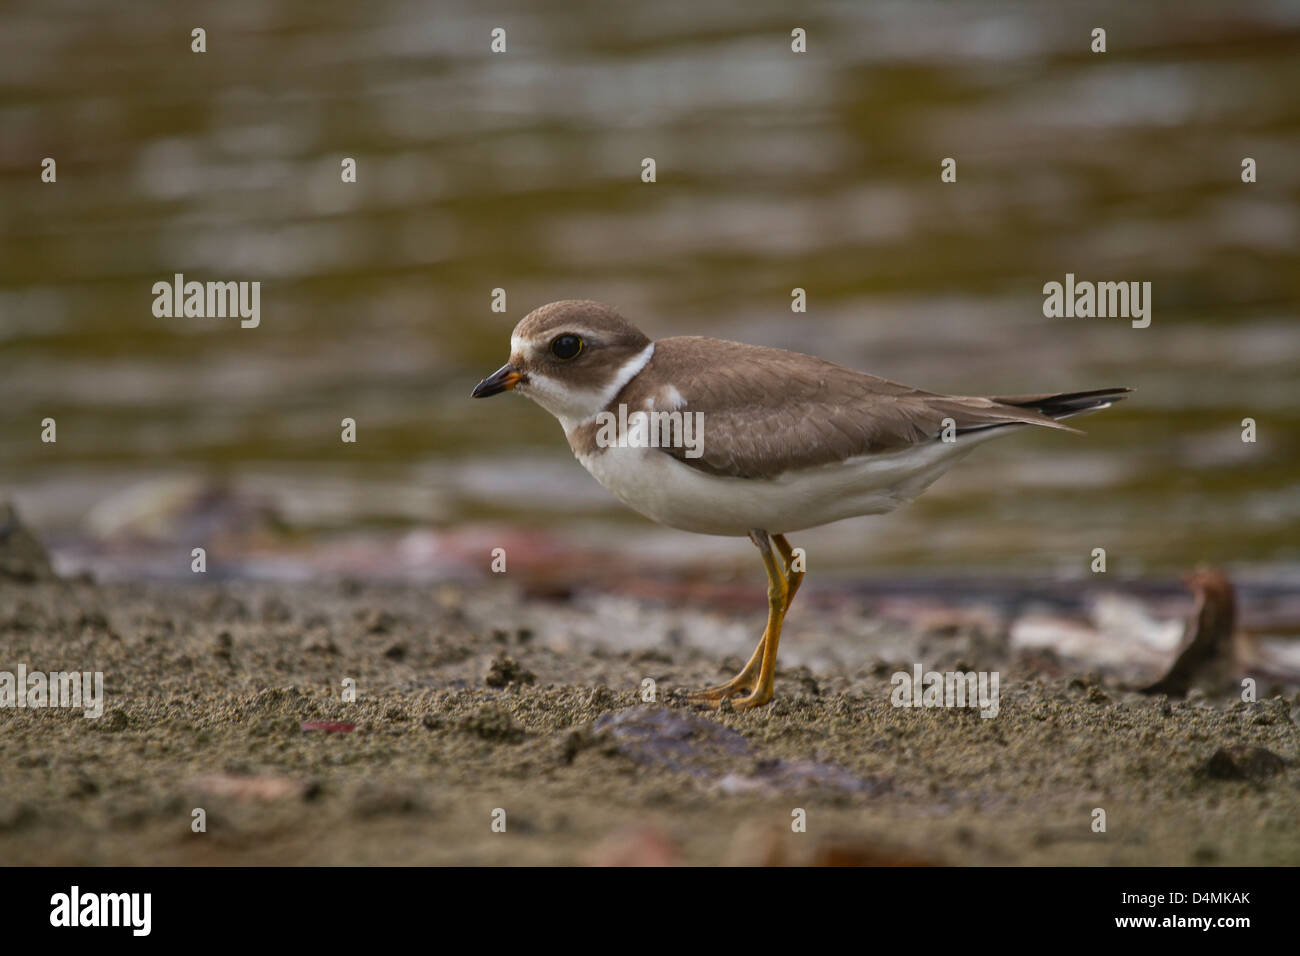 Little Ringed Plover on sand Stock Photo